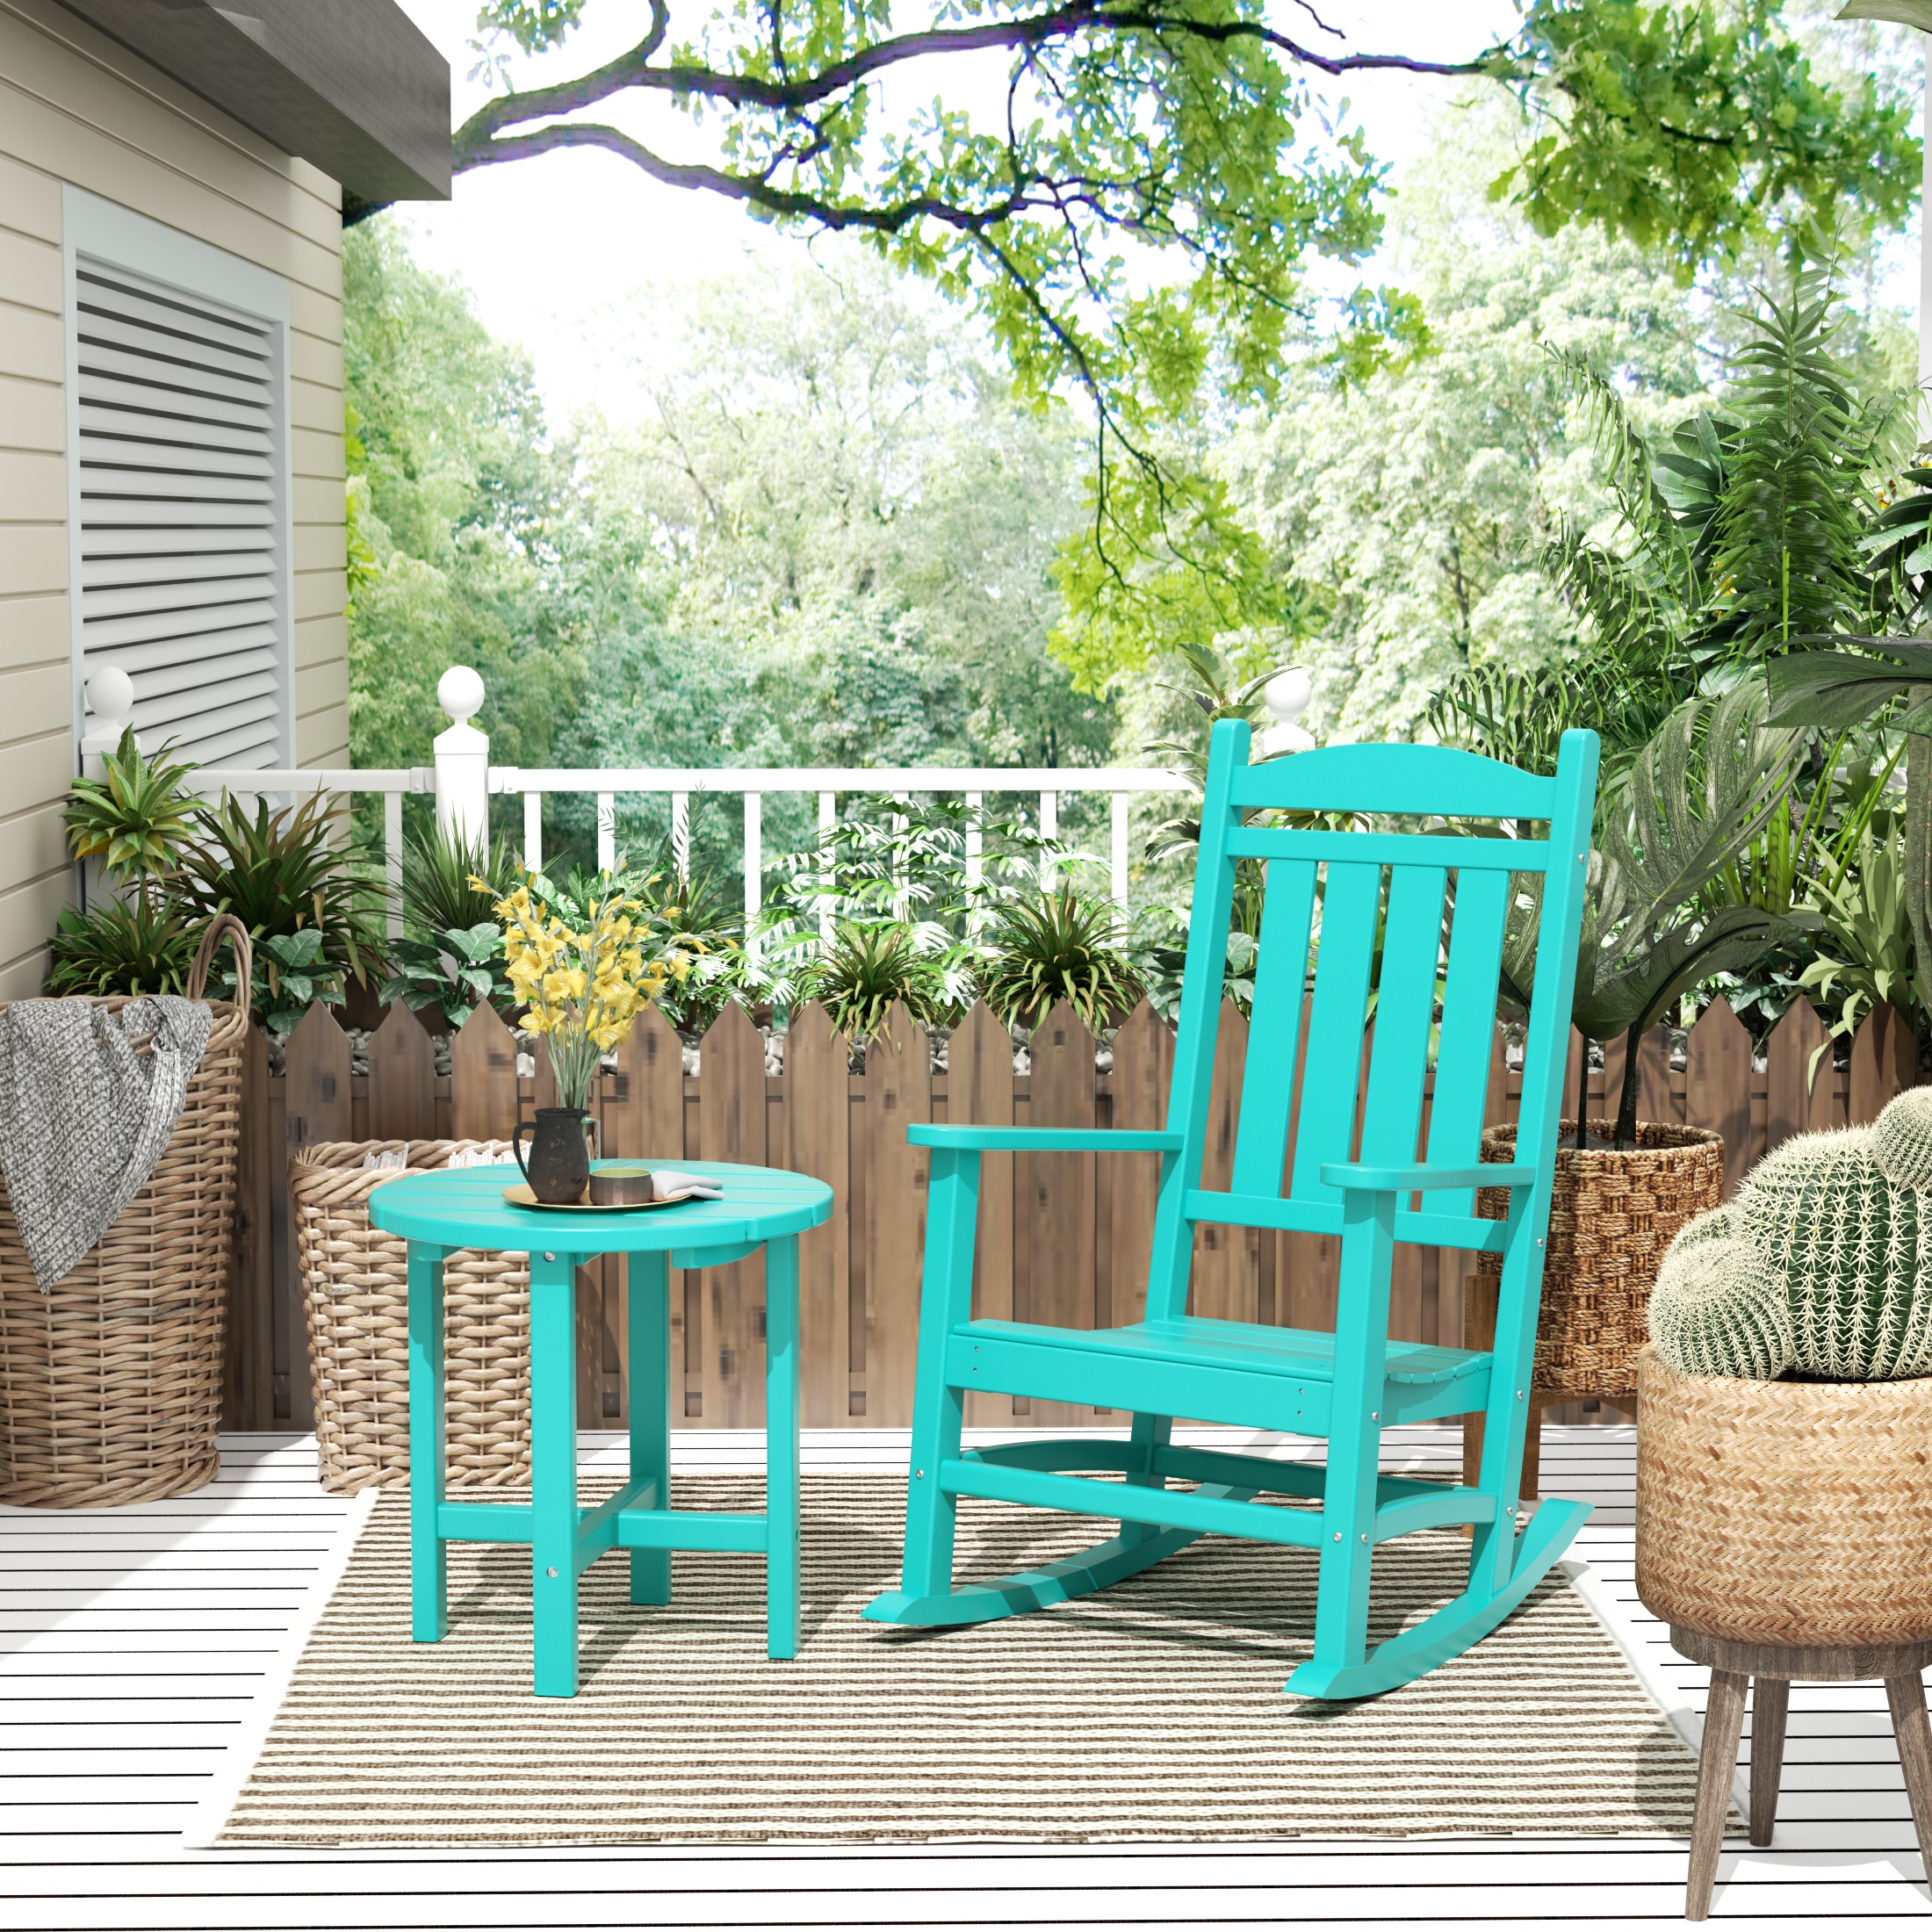 GARDEN 2-Piece Set Classic Plastic Porch Rocking Chair with Round Side Table Included, Turquoise - image 1 of 7